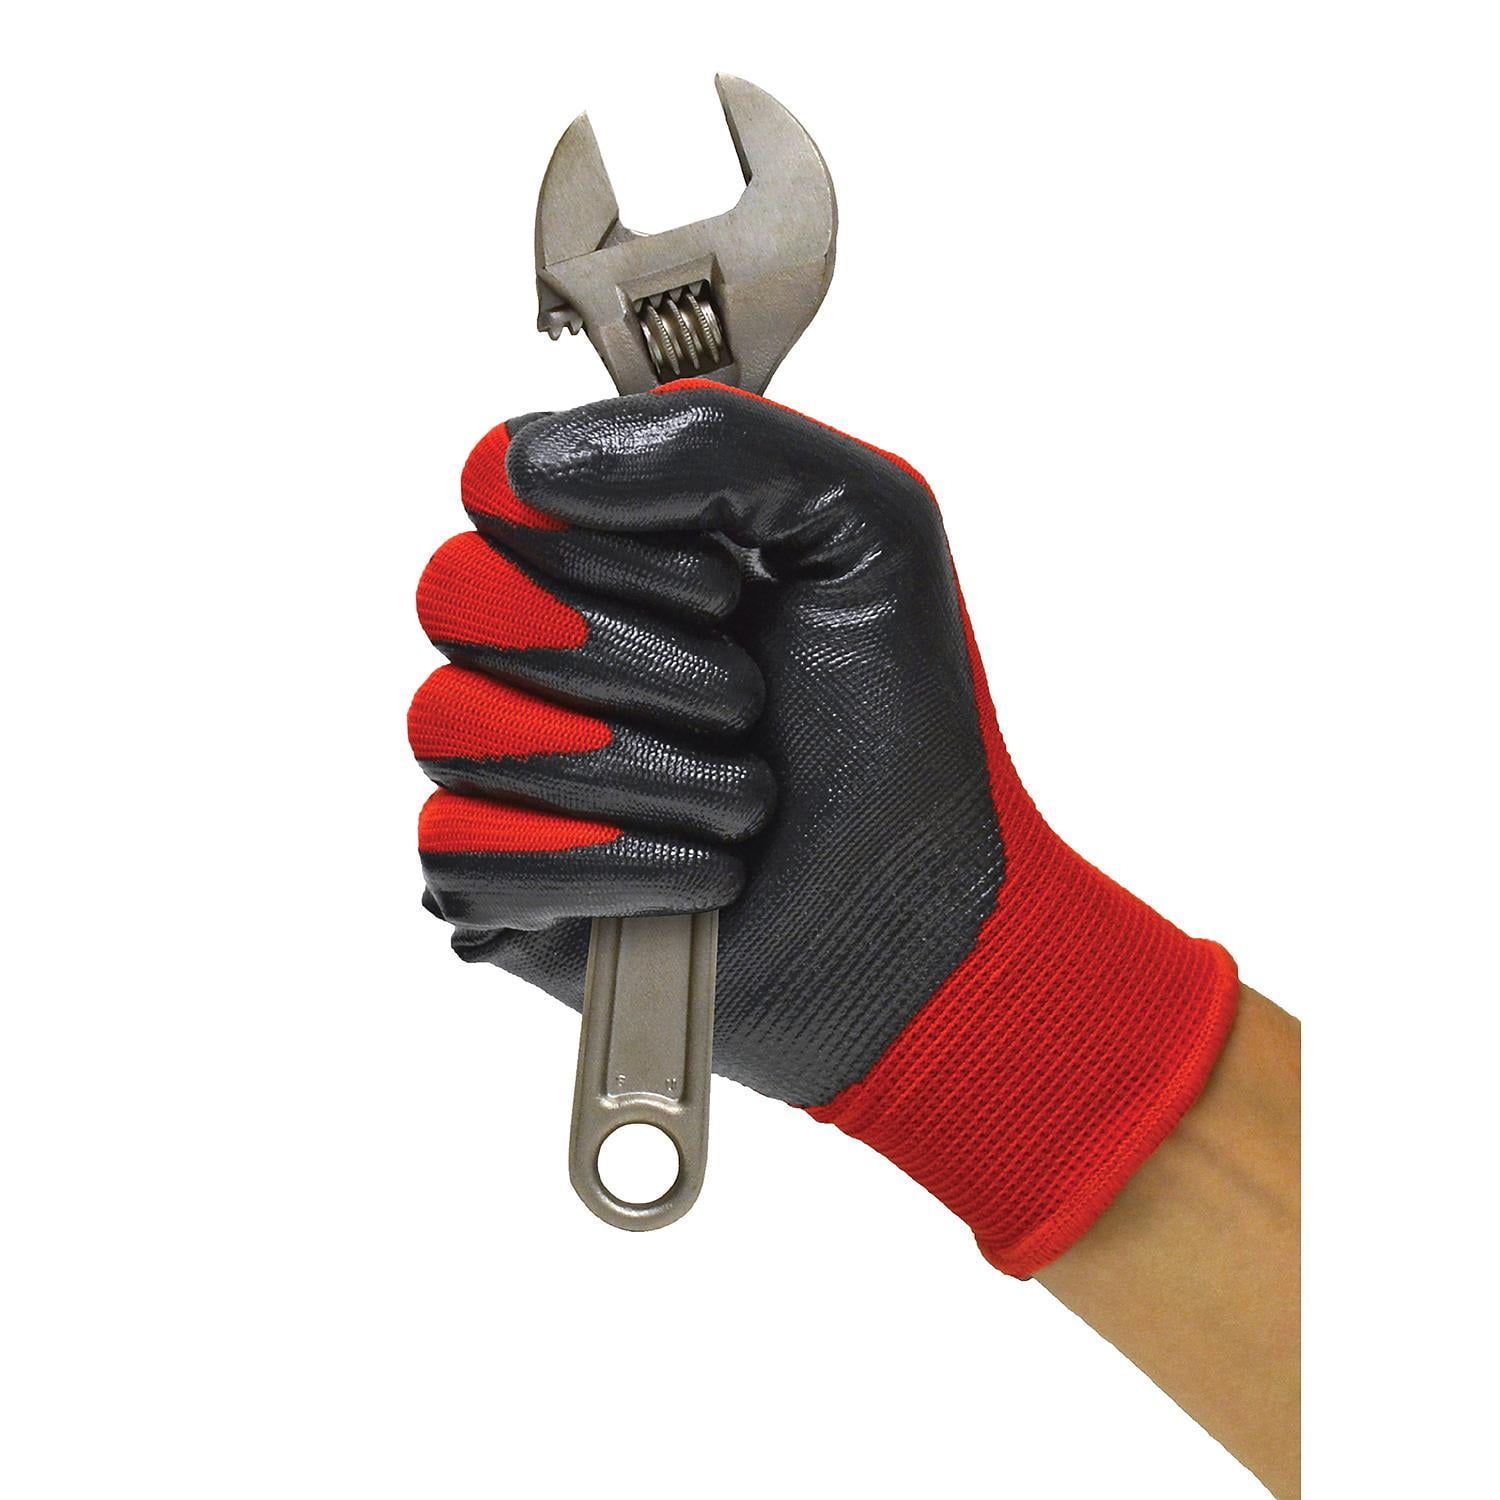 Size Large Grease Monkey Nitrile Coated Work Gloves 16 Pack for sale online 